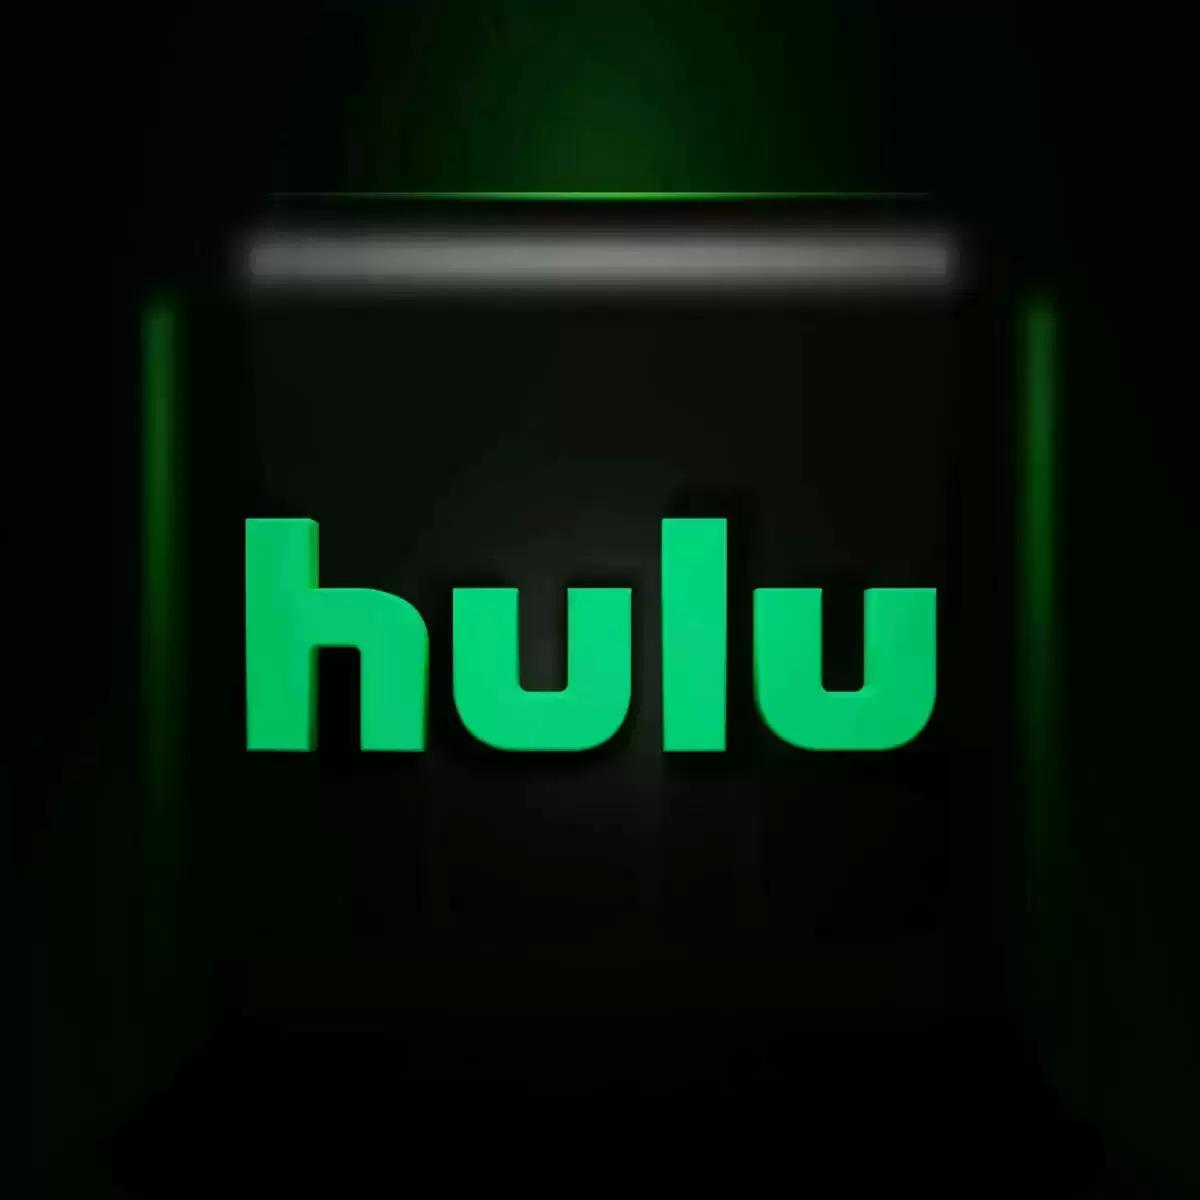 Hulu Black Friday Deal $0.99 a Month